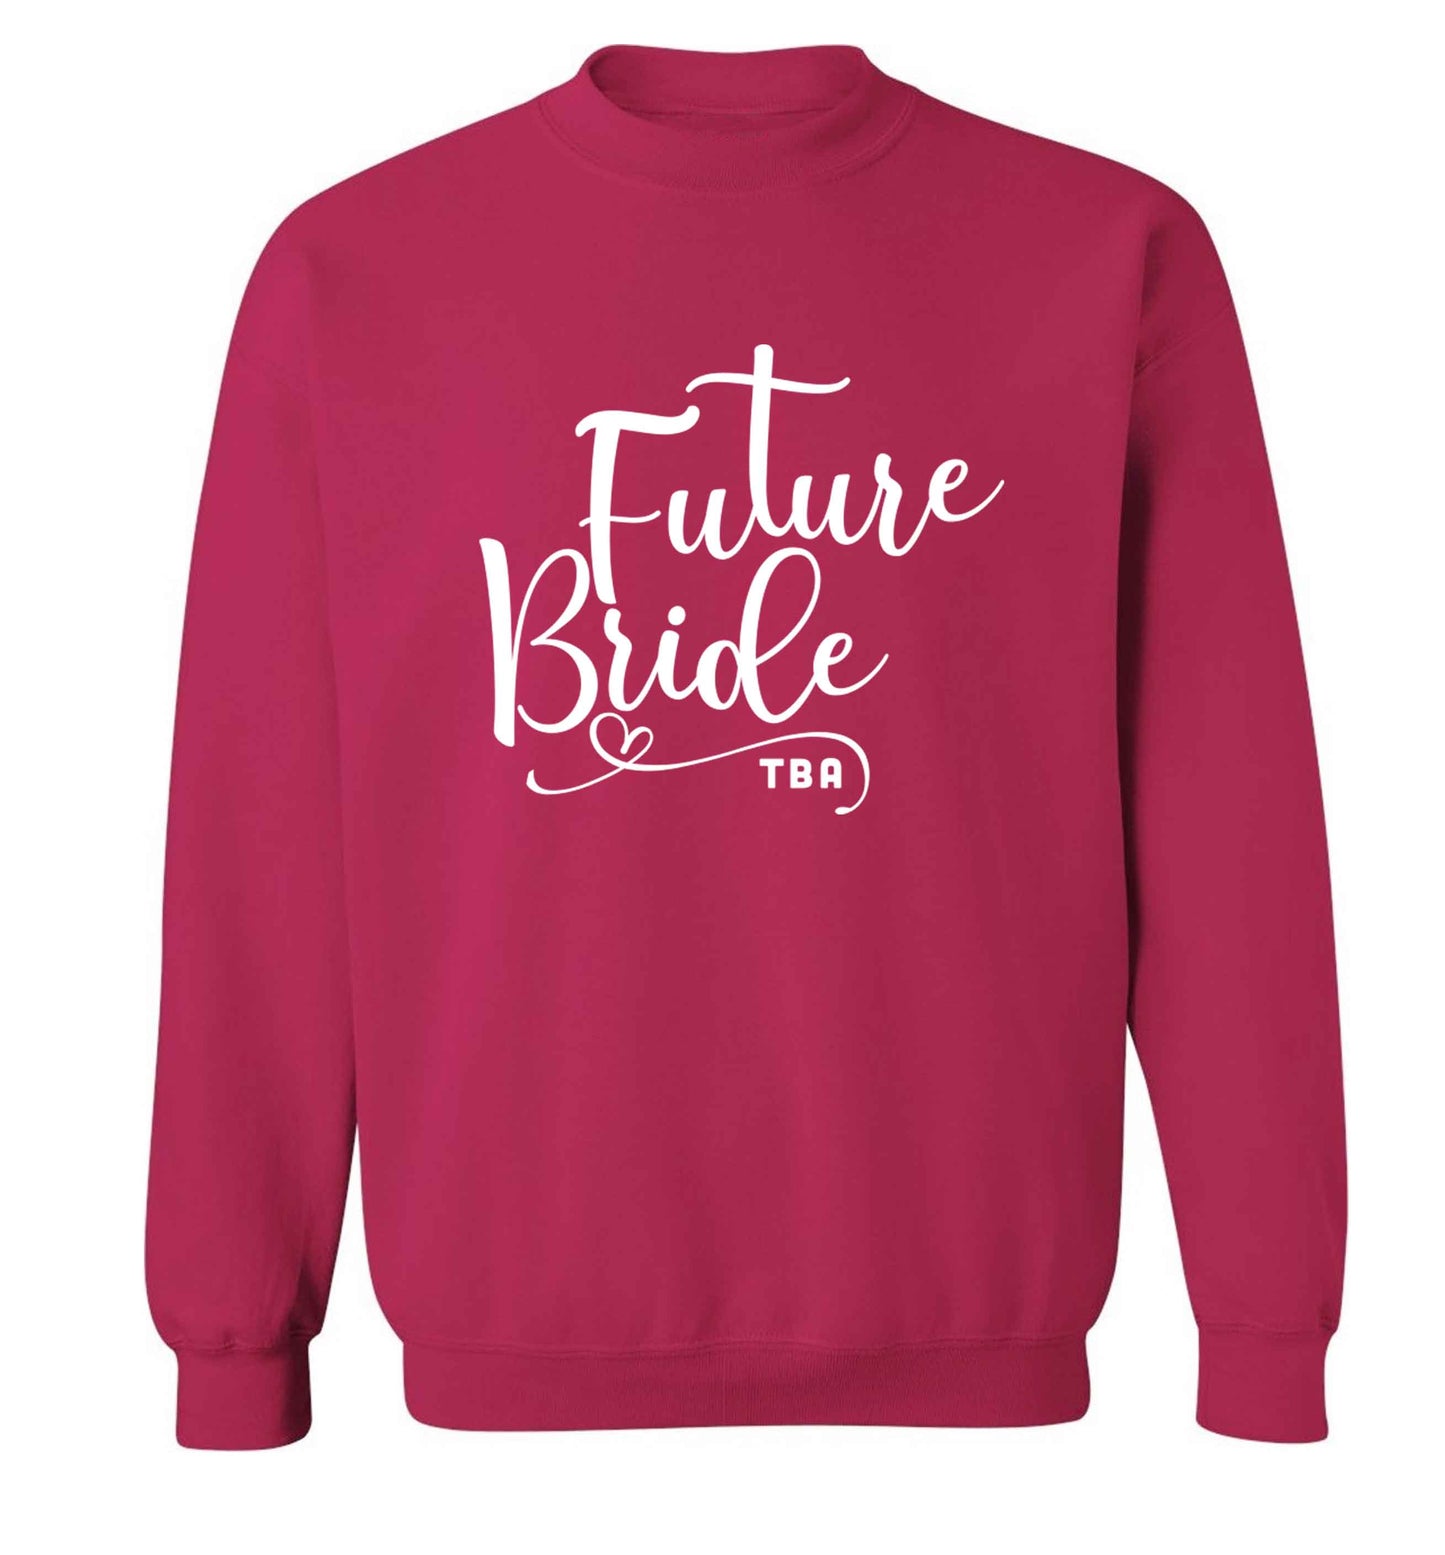 Has your wedding been postponed or delayed?Just another reason to party even HARDER!  adult's unisex pink sweater 2XL